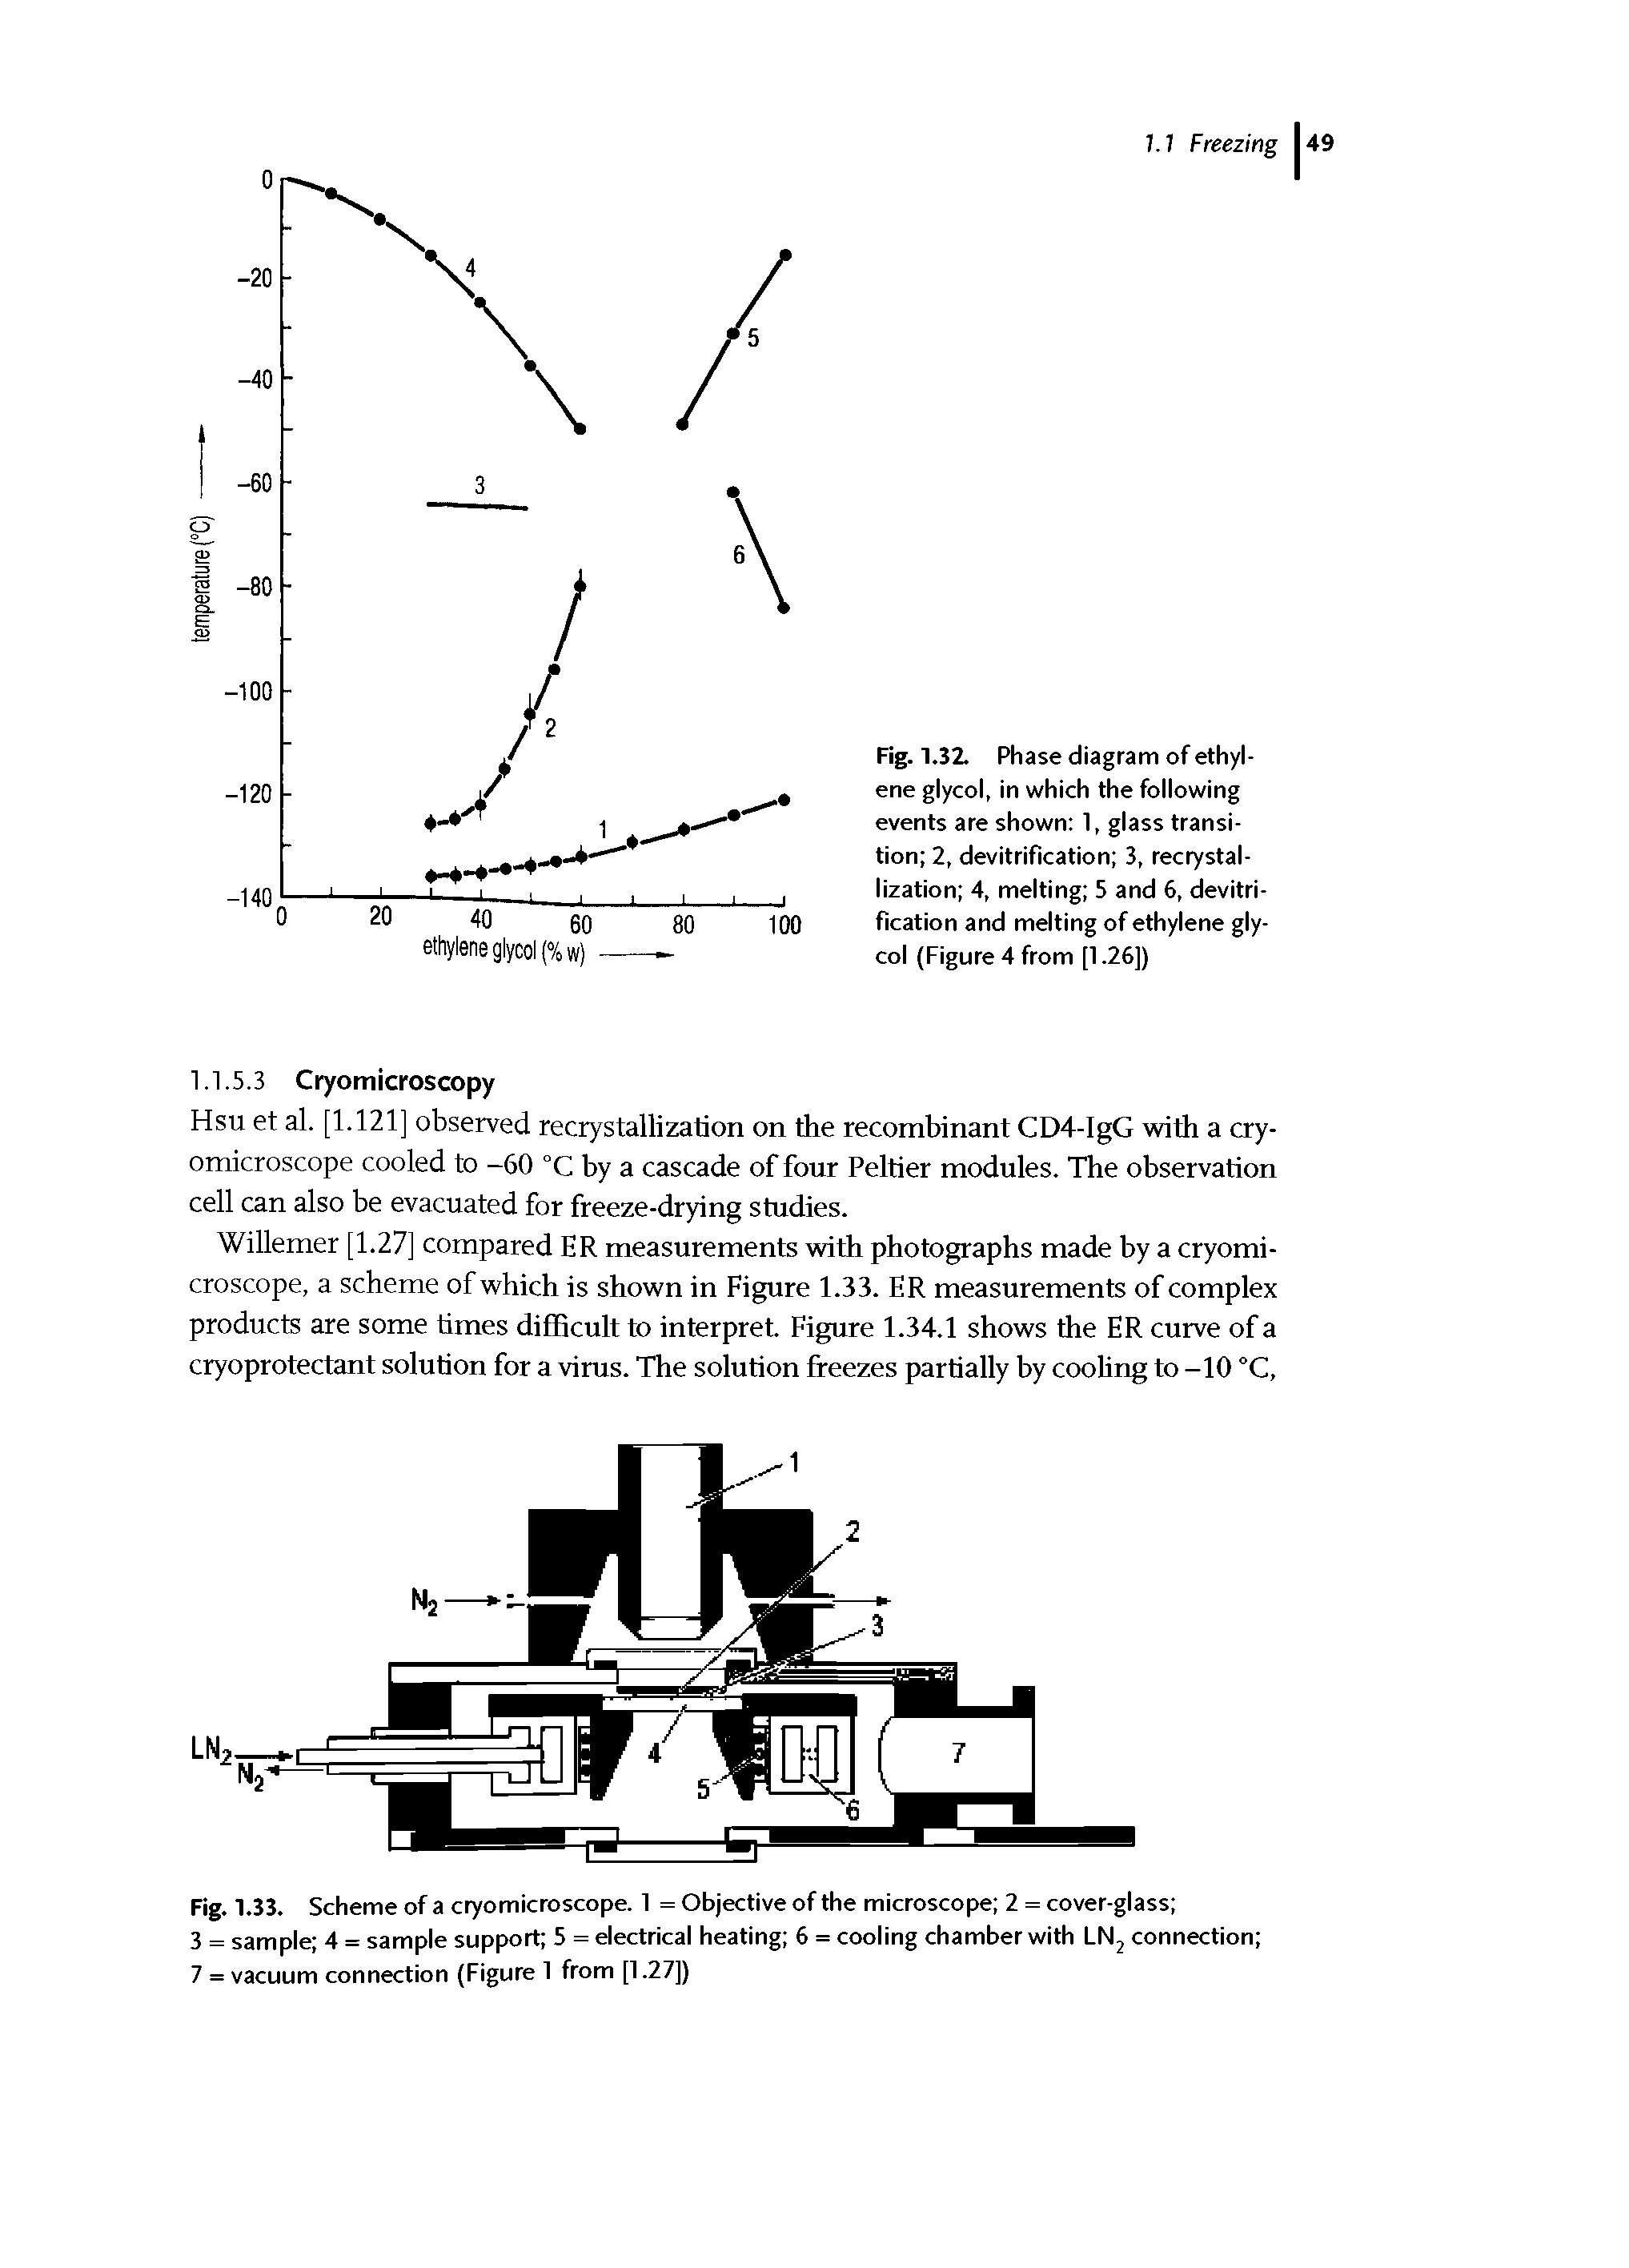 Fig. 1.32. Phase diagram of ethylene glycol, in which the following events are shown 1, glass transition 2, devitrification 3, recrystallization 4, melting 5 and 6, devitrification and melting of ethylene glycol (Figure 4 from [1.26])...